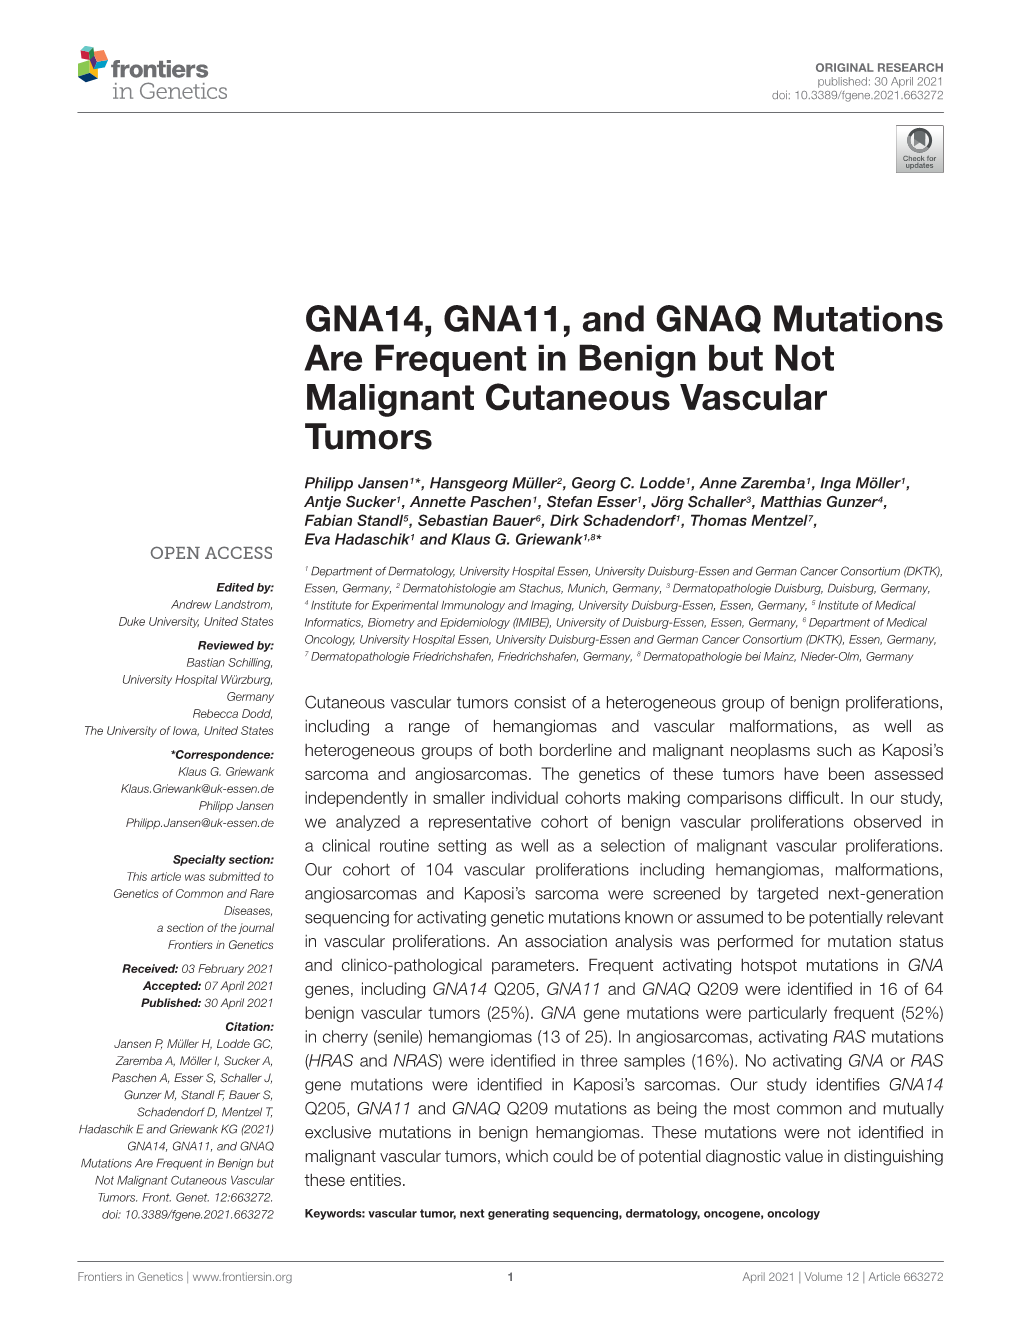 GNA14, GNA11, and GNAQ Mutations Are Frequent in Benign but Not Malignant Cutaneous Vascular Tumors